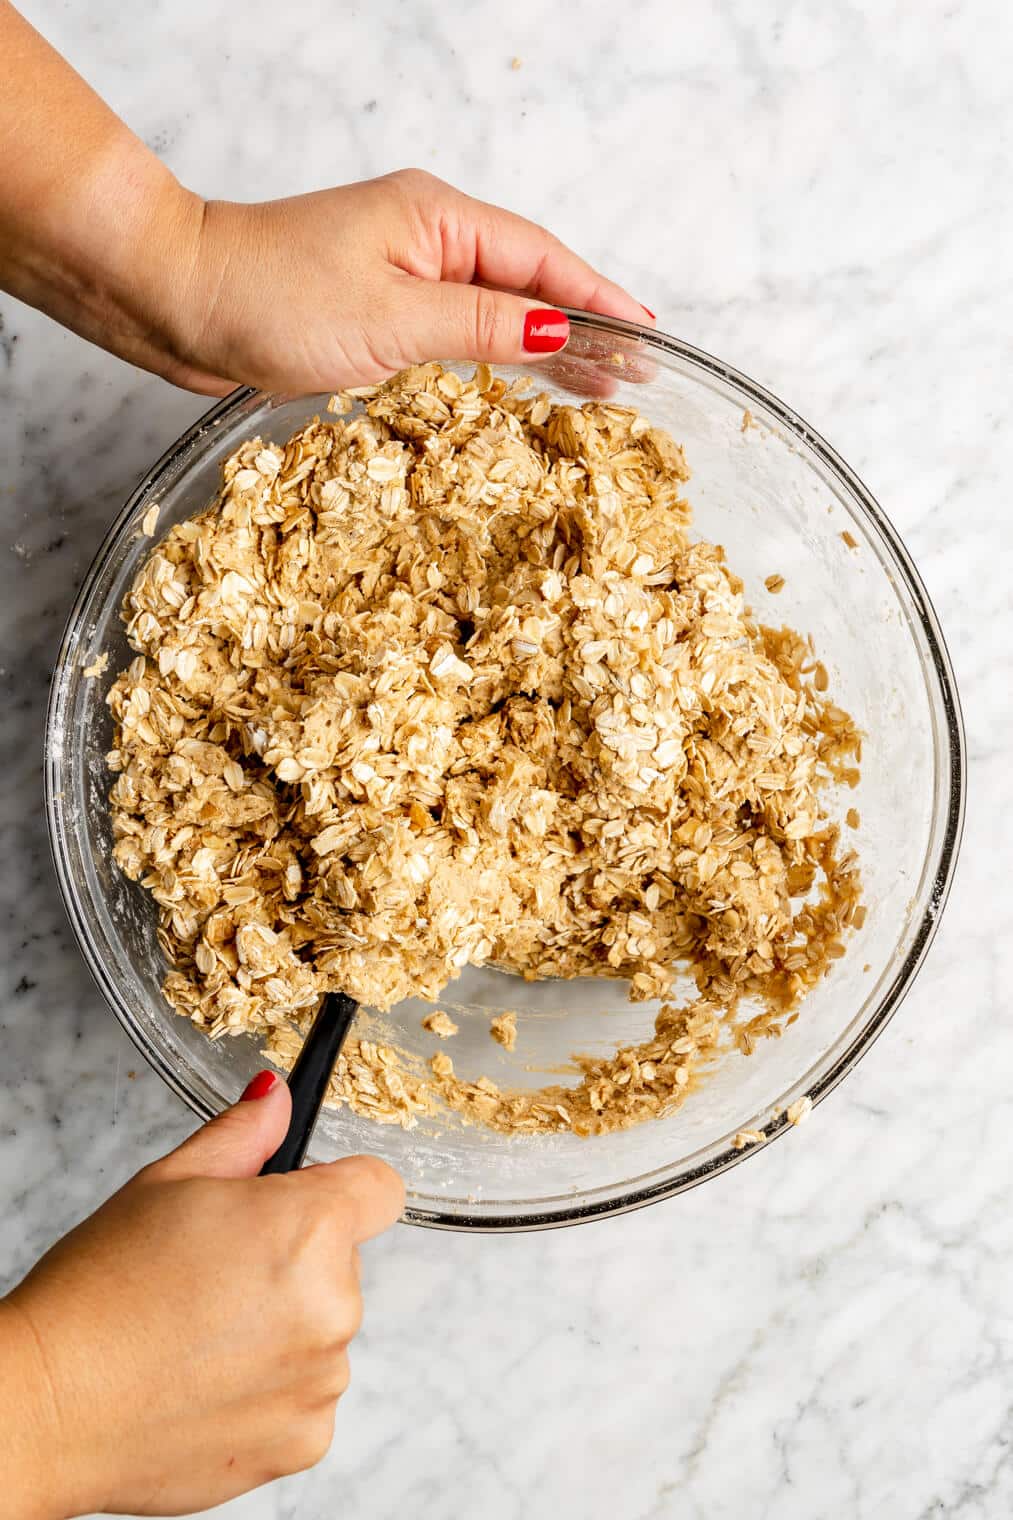 Hand holding spatula stirring oats into cookie dough mixture.